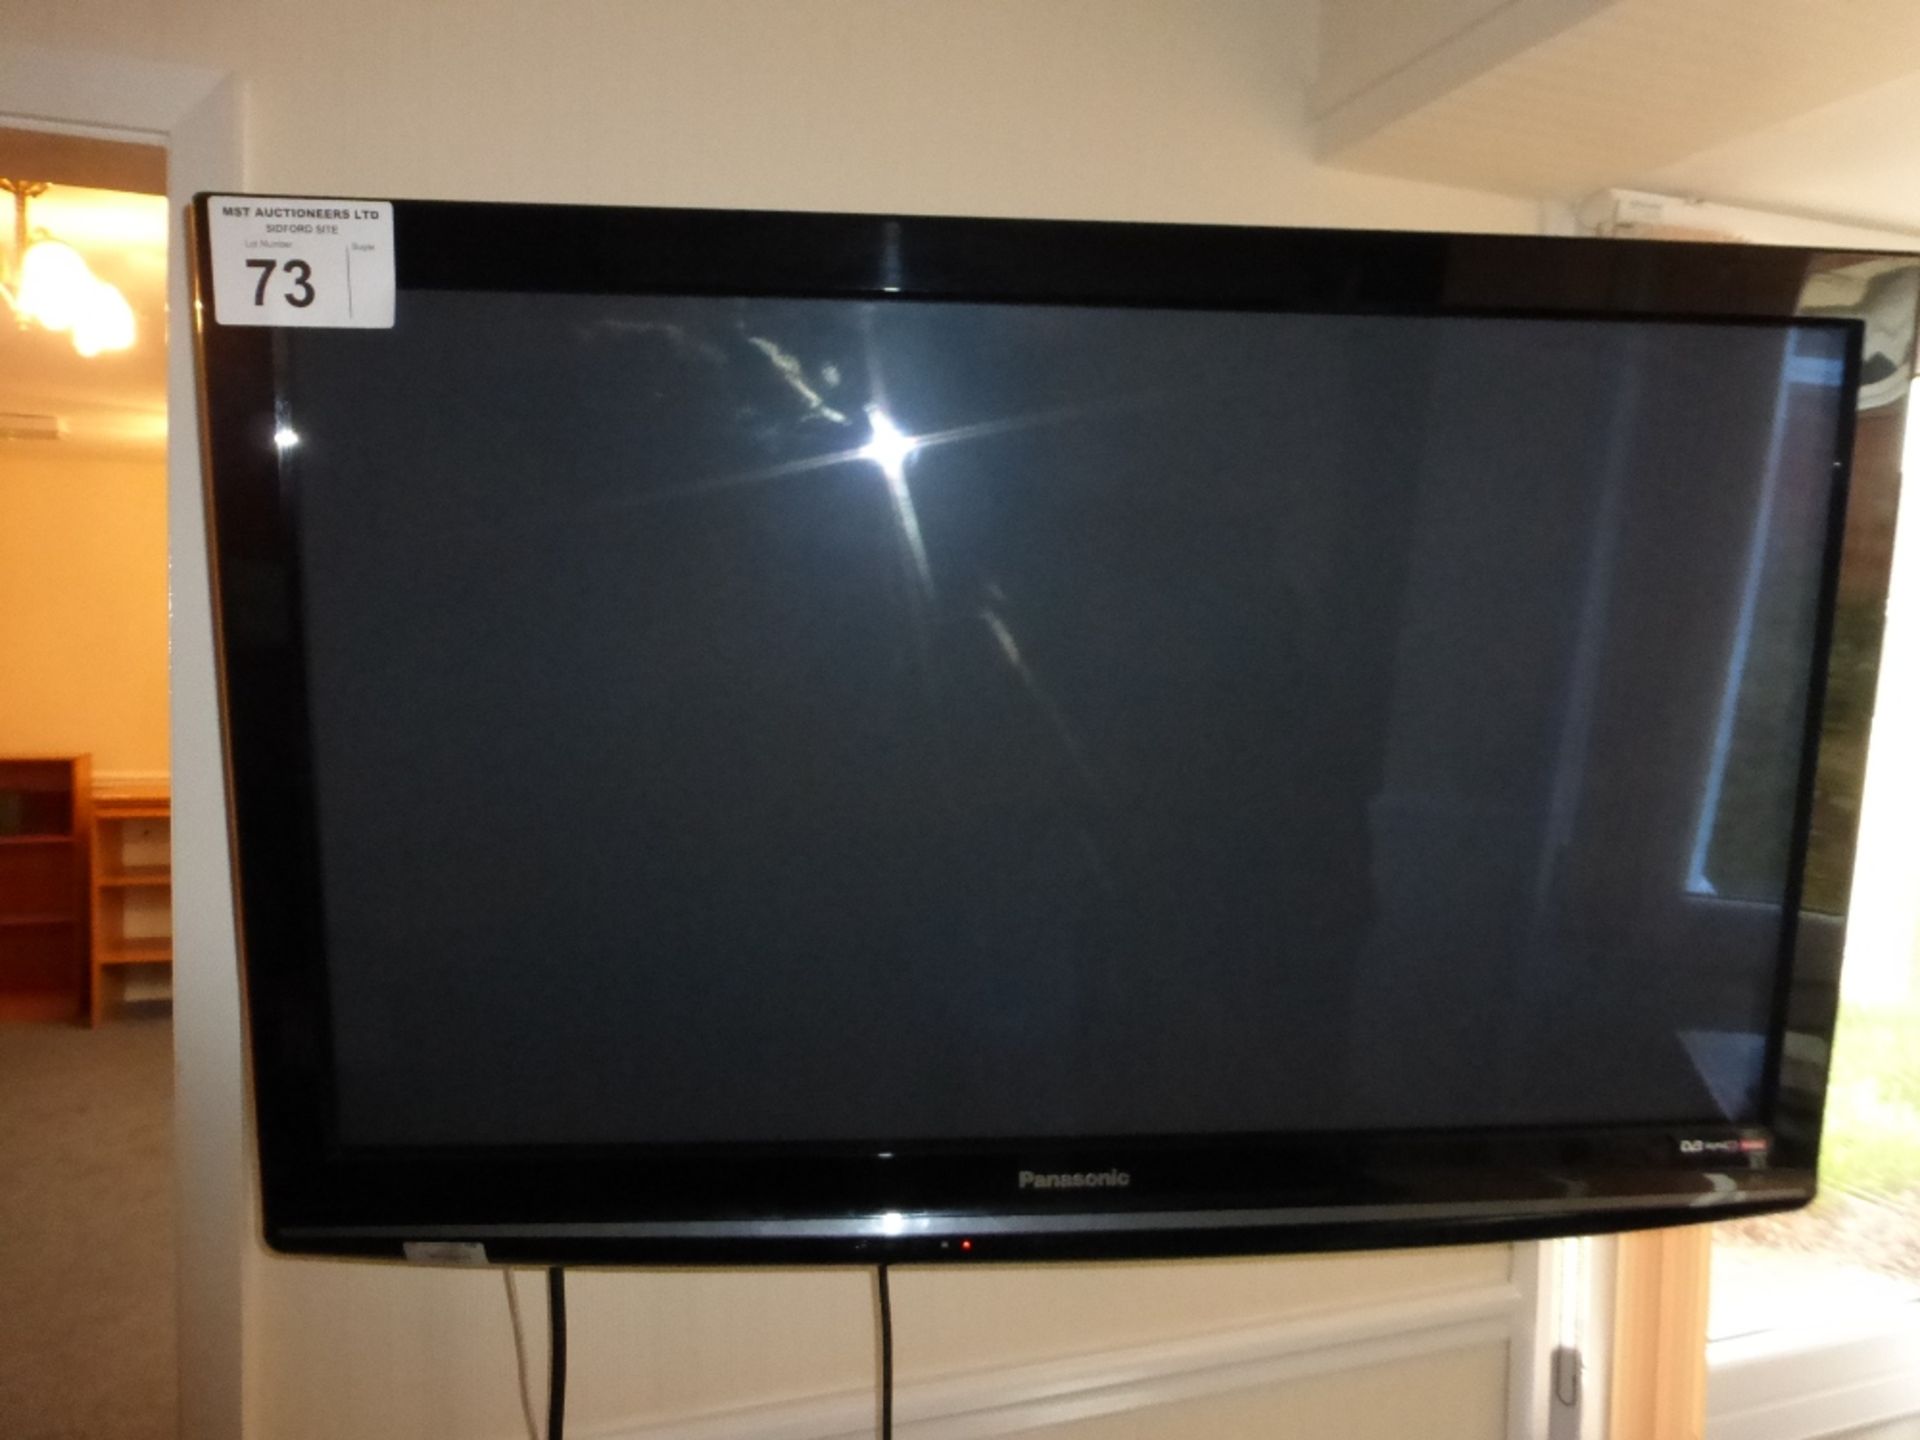 1 Panasonic 42 inch wall mounted LCD TV, Model number: TX-42PX10B, Serial number: FJ-9213410 (